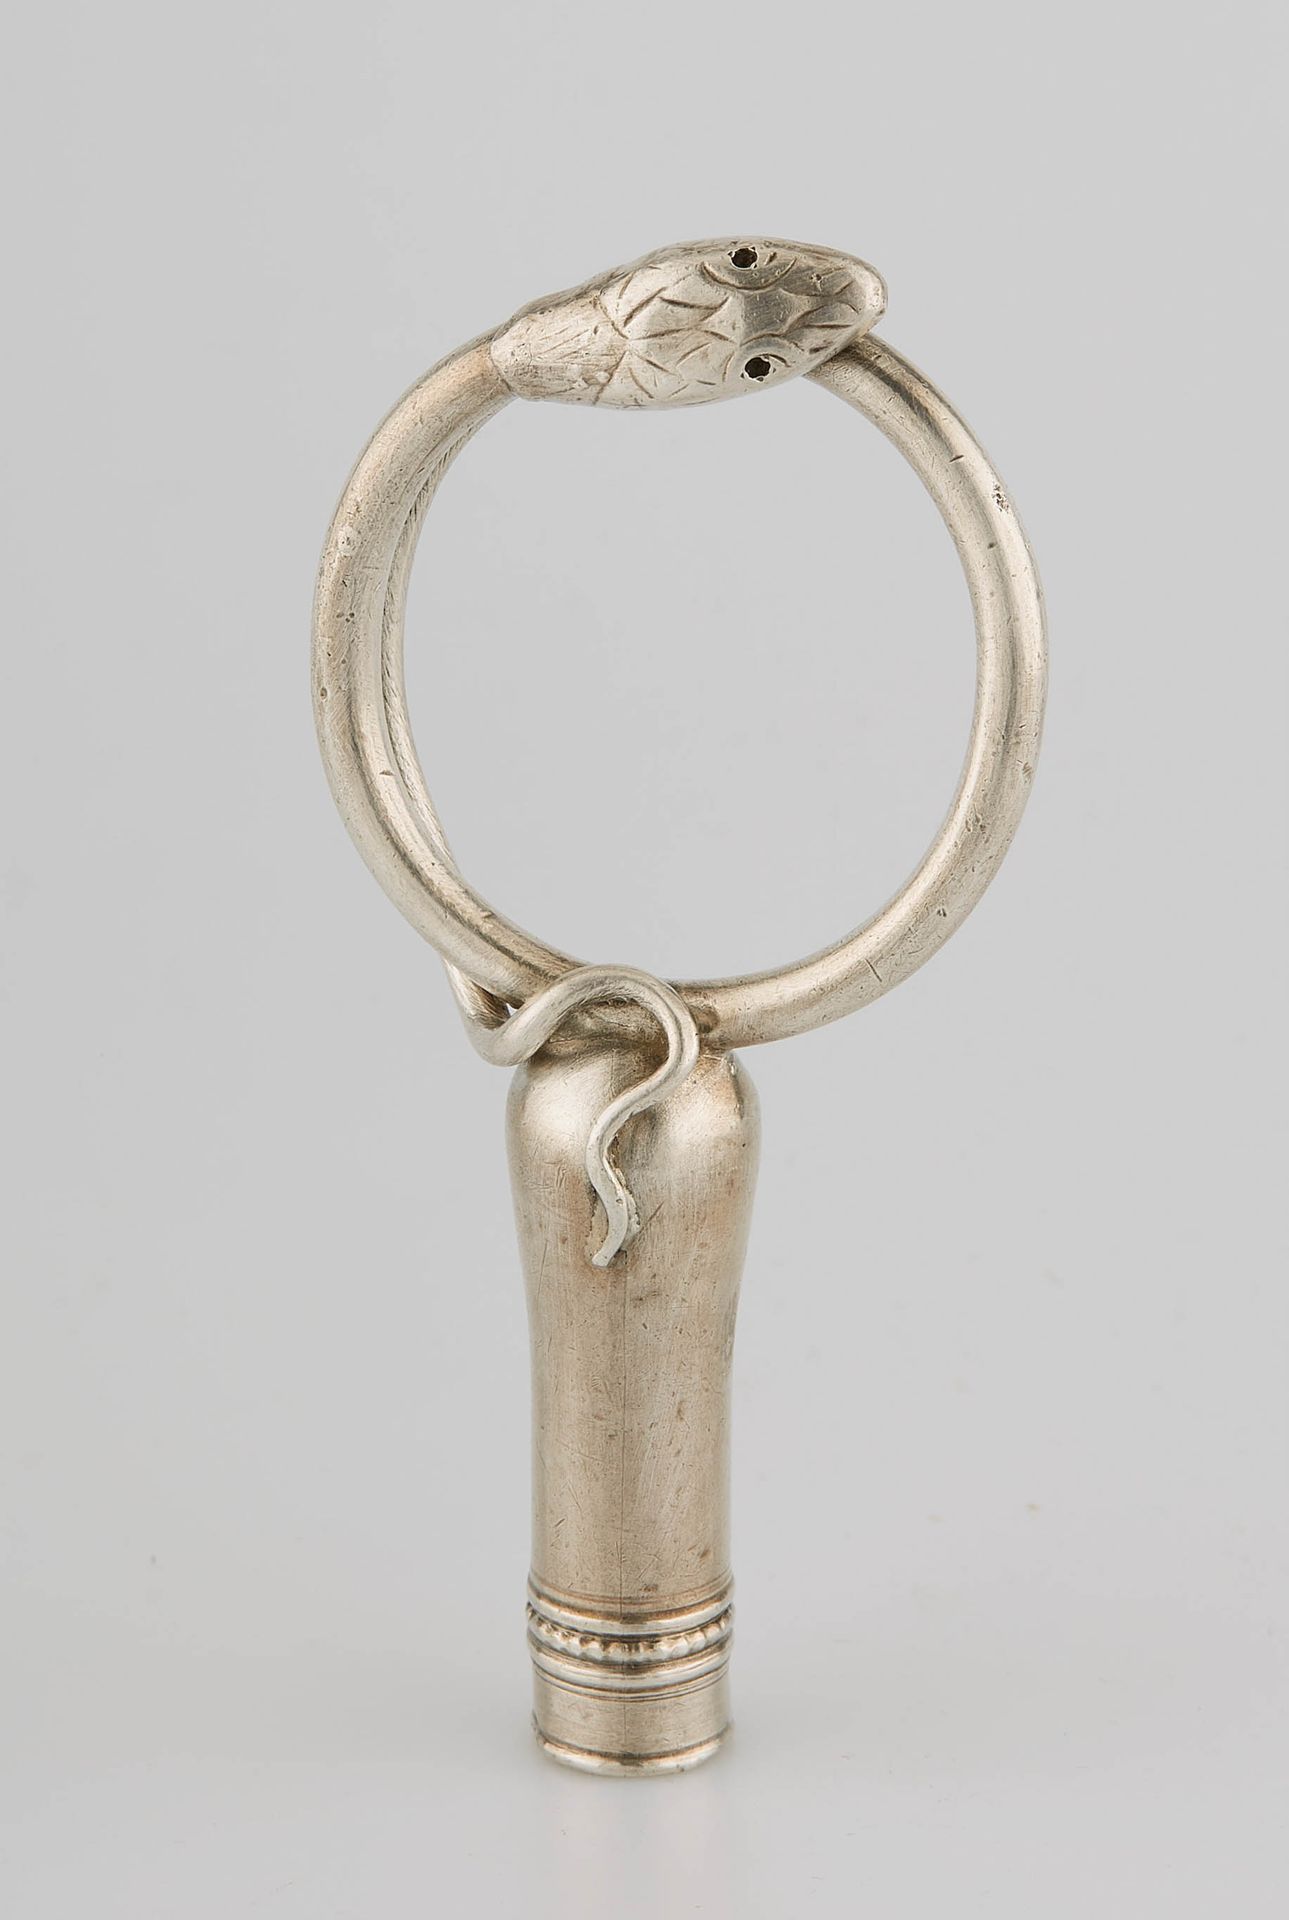 Null 
A silver plated cane or parasol knob with a snake in the grip and a glove &hellip;